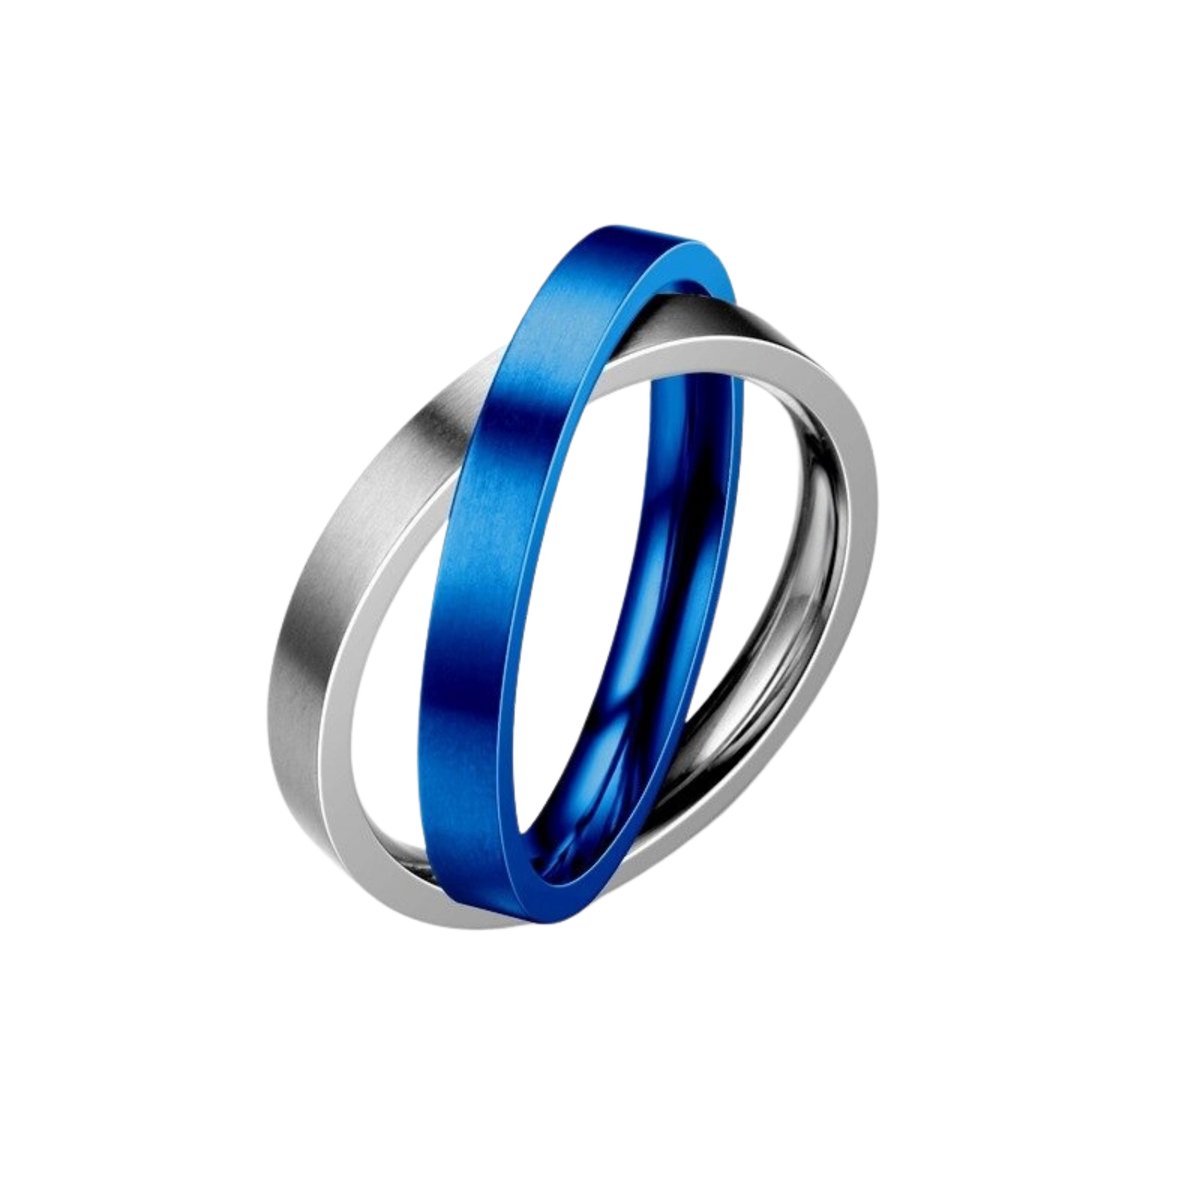 Anxiety Ring - (2 ringen) - Stress Ring - Fidget Ring - Anxiety Ring For Finger - Draaibare Ring - Spinning Ring - Zilver-Blauw - (17.25 mm / maat 54)